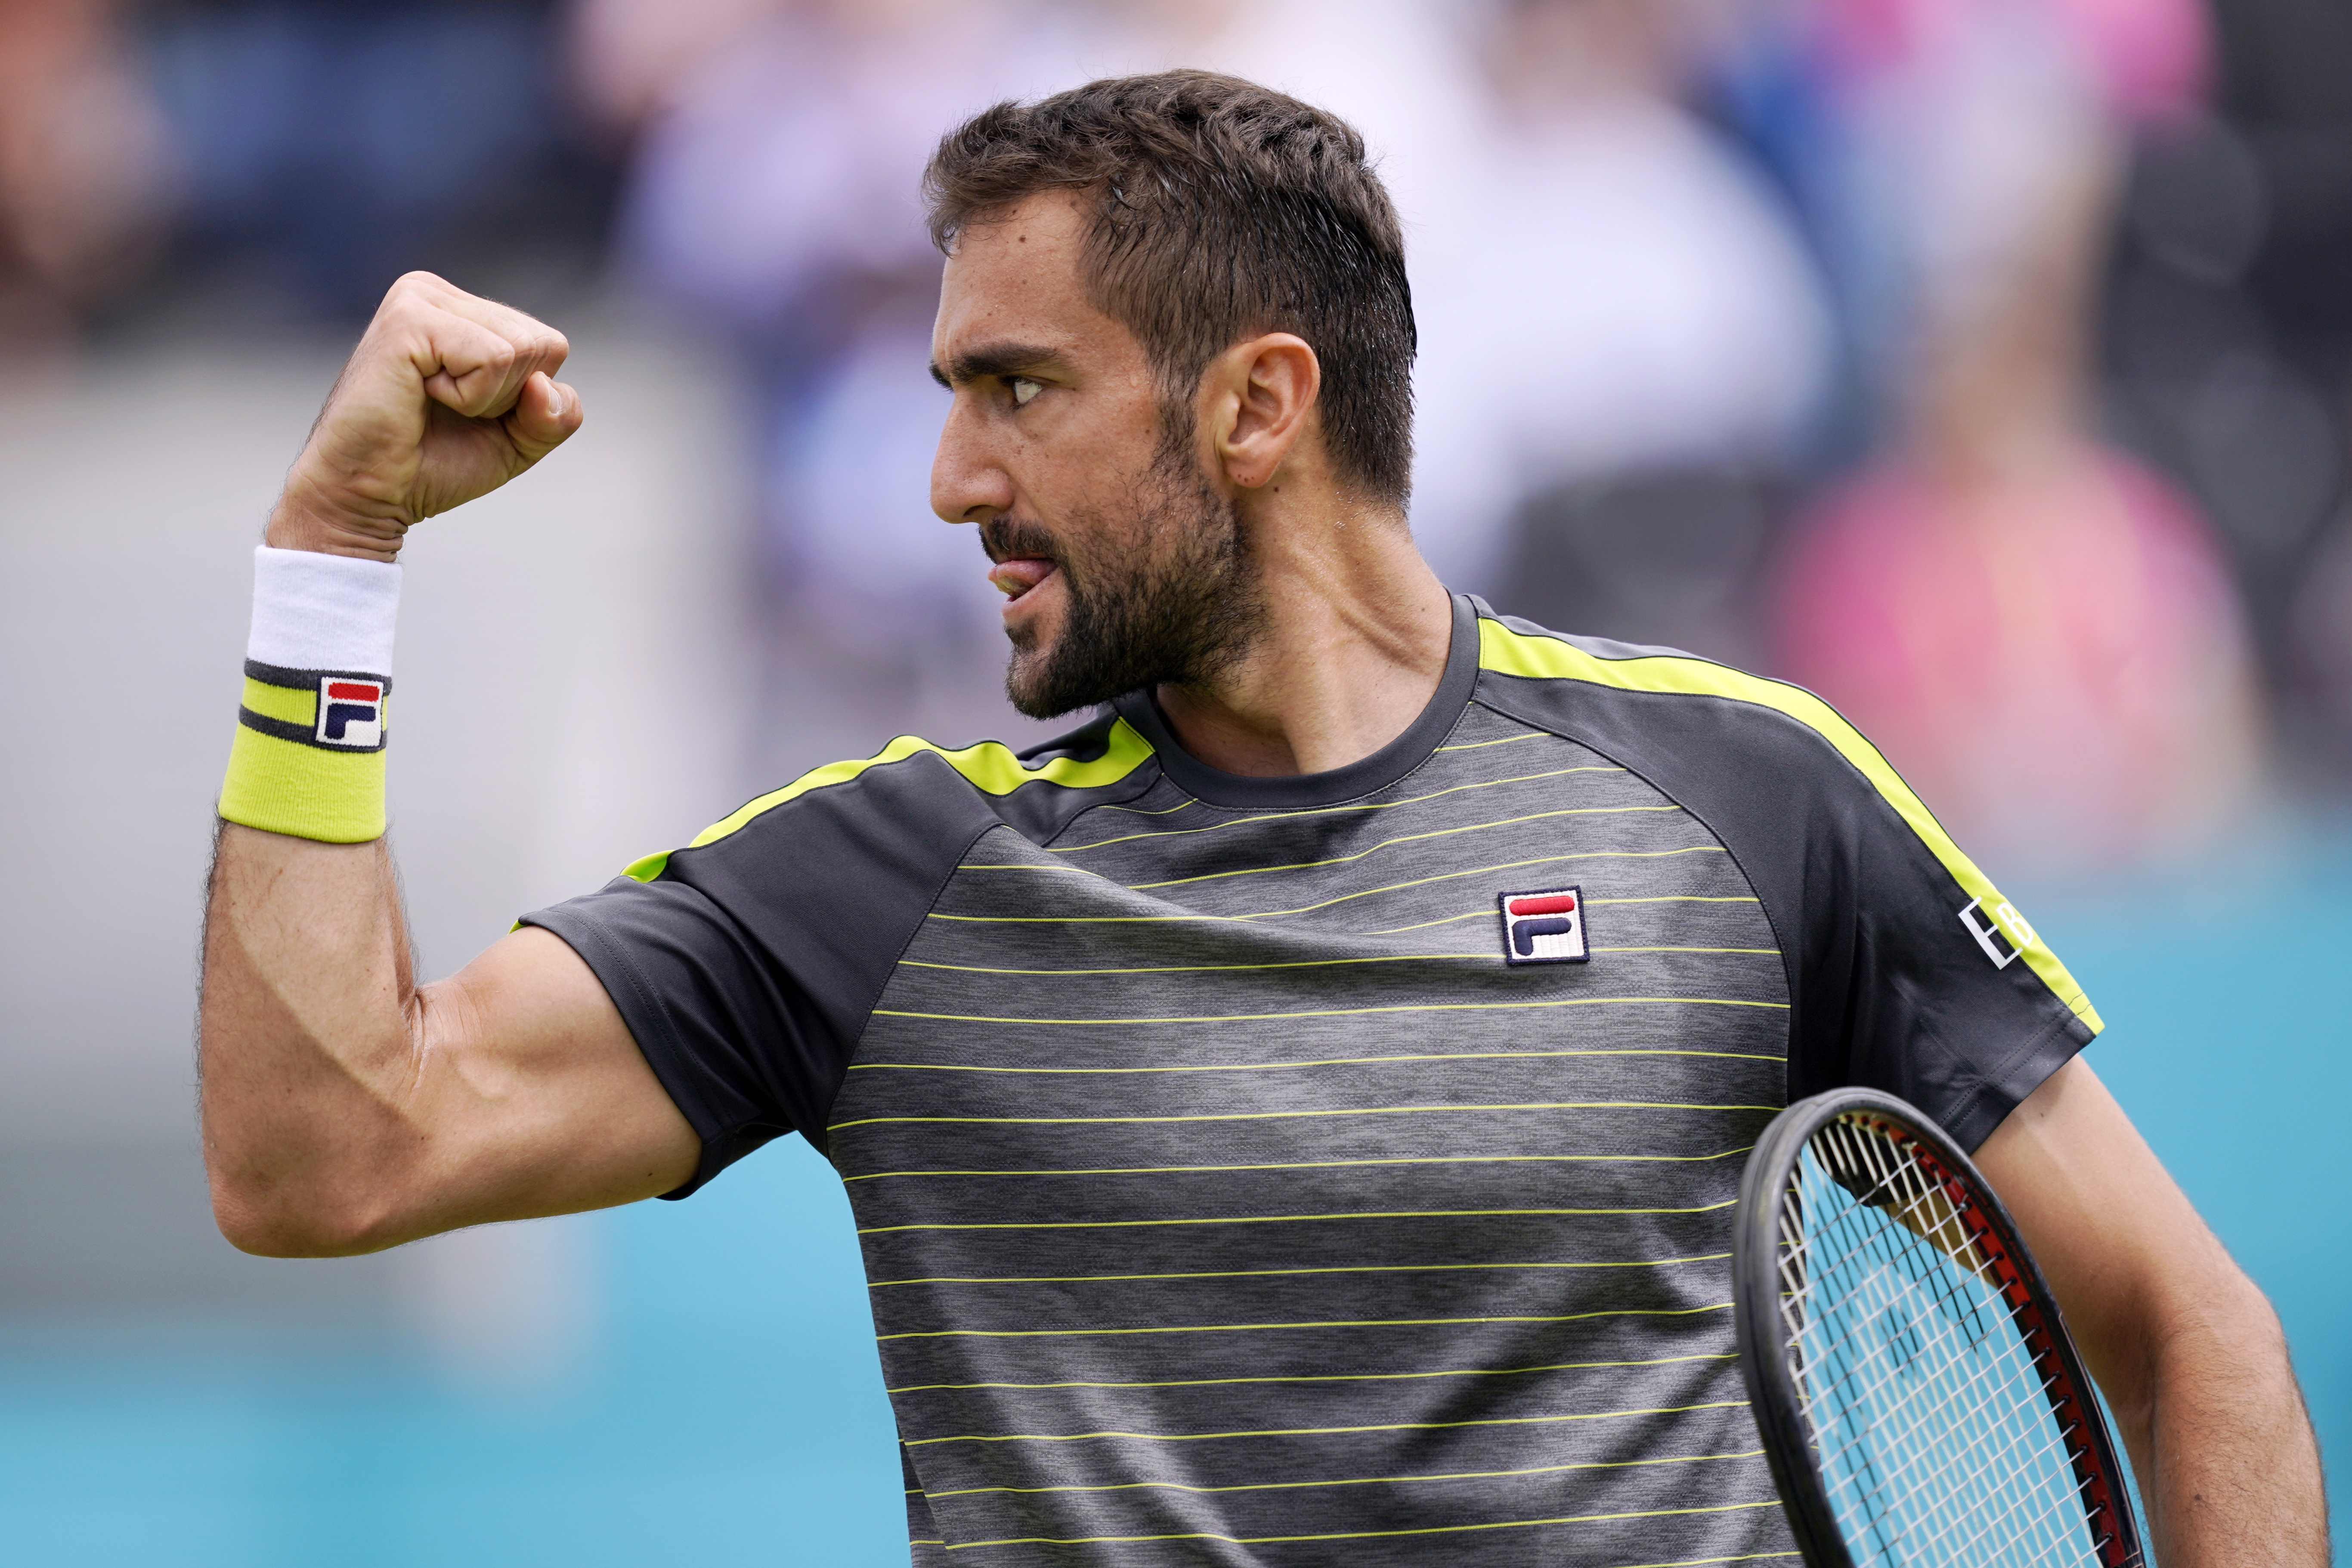 epa07654054 Croatia's Marin Cilic reacts during his round 32 match against Chile's Cristian Garin at the Fever Tree Championship at Queen's Club in London, Britain, 17 June 2019. The tournament runs from 17th June till 23 June 2019.  EPA/WILL OLIVER